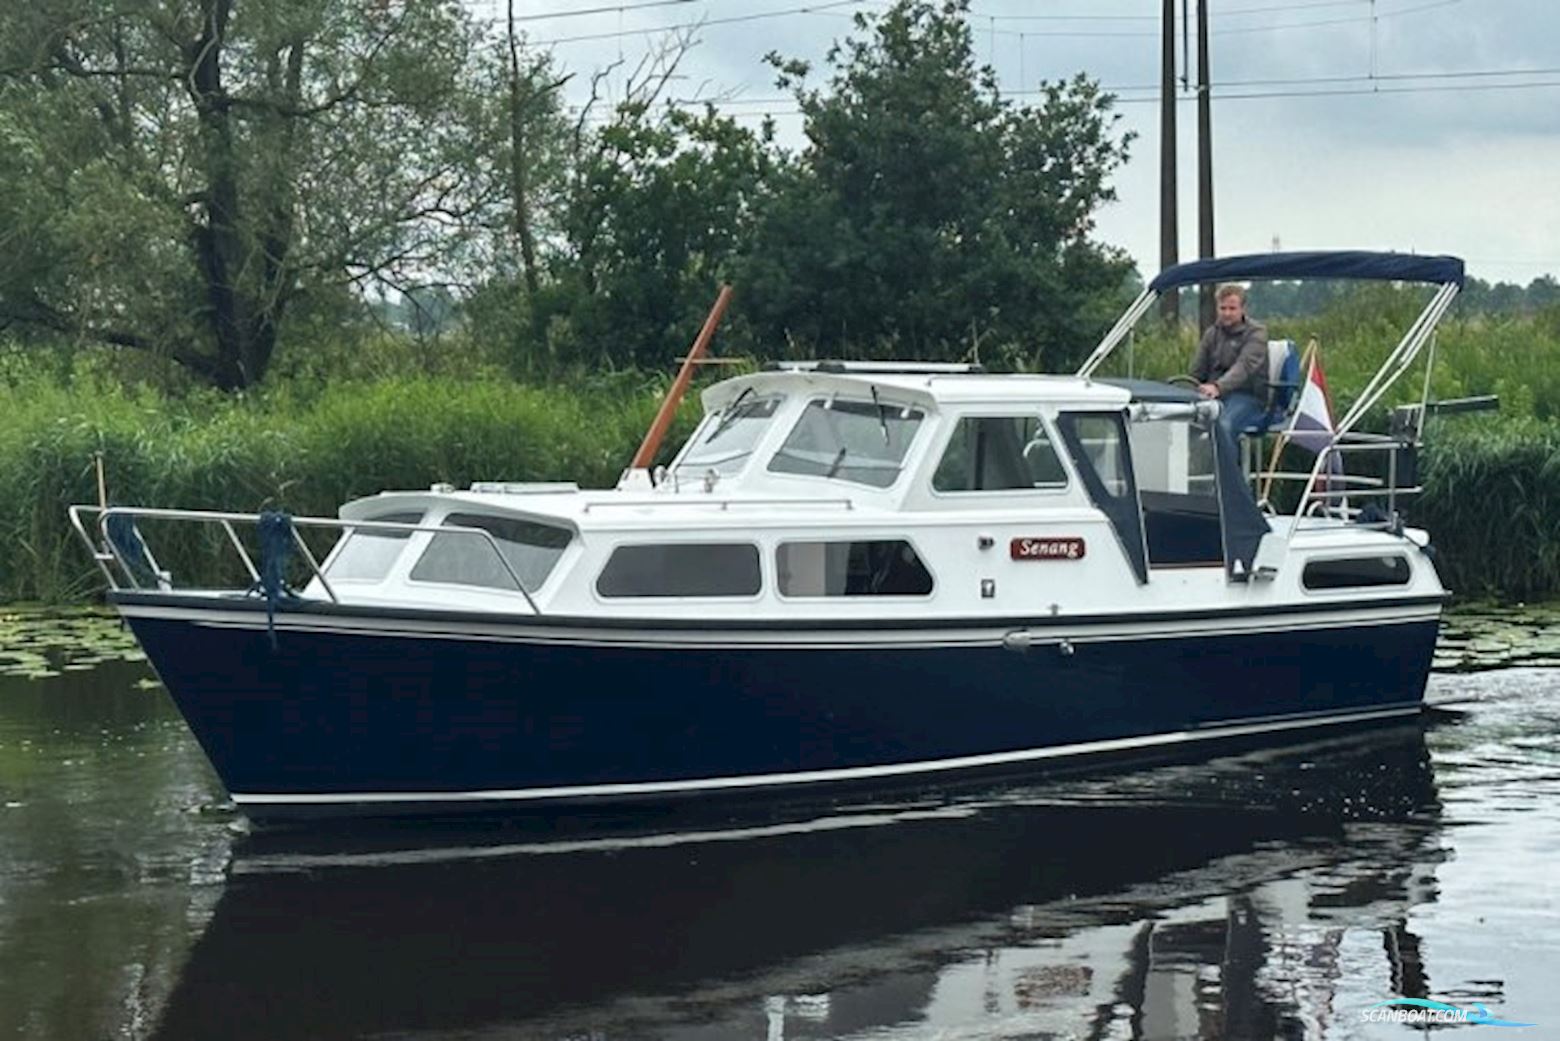 Aquanaut 930 AK Motor boat 1978, with Peugeot engine, The Netherlands